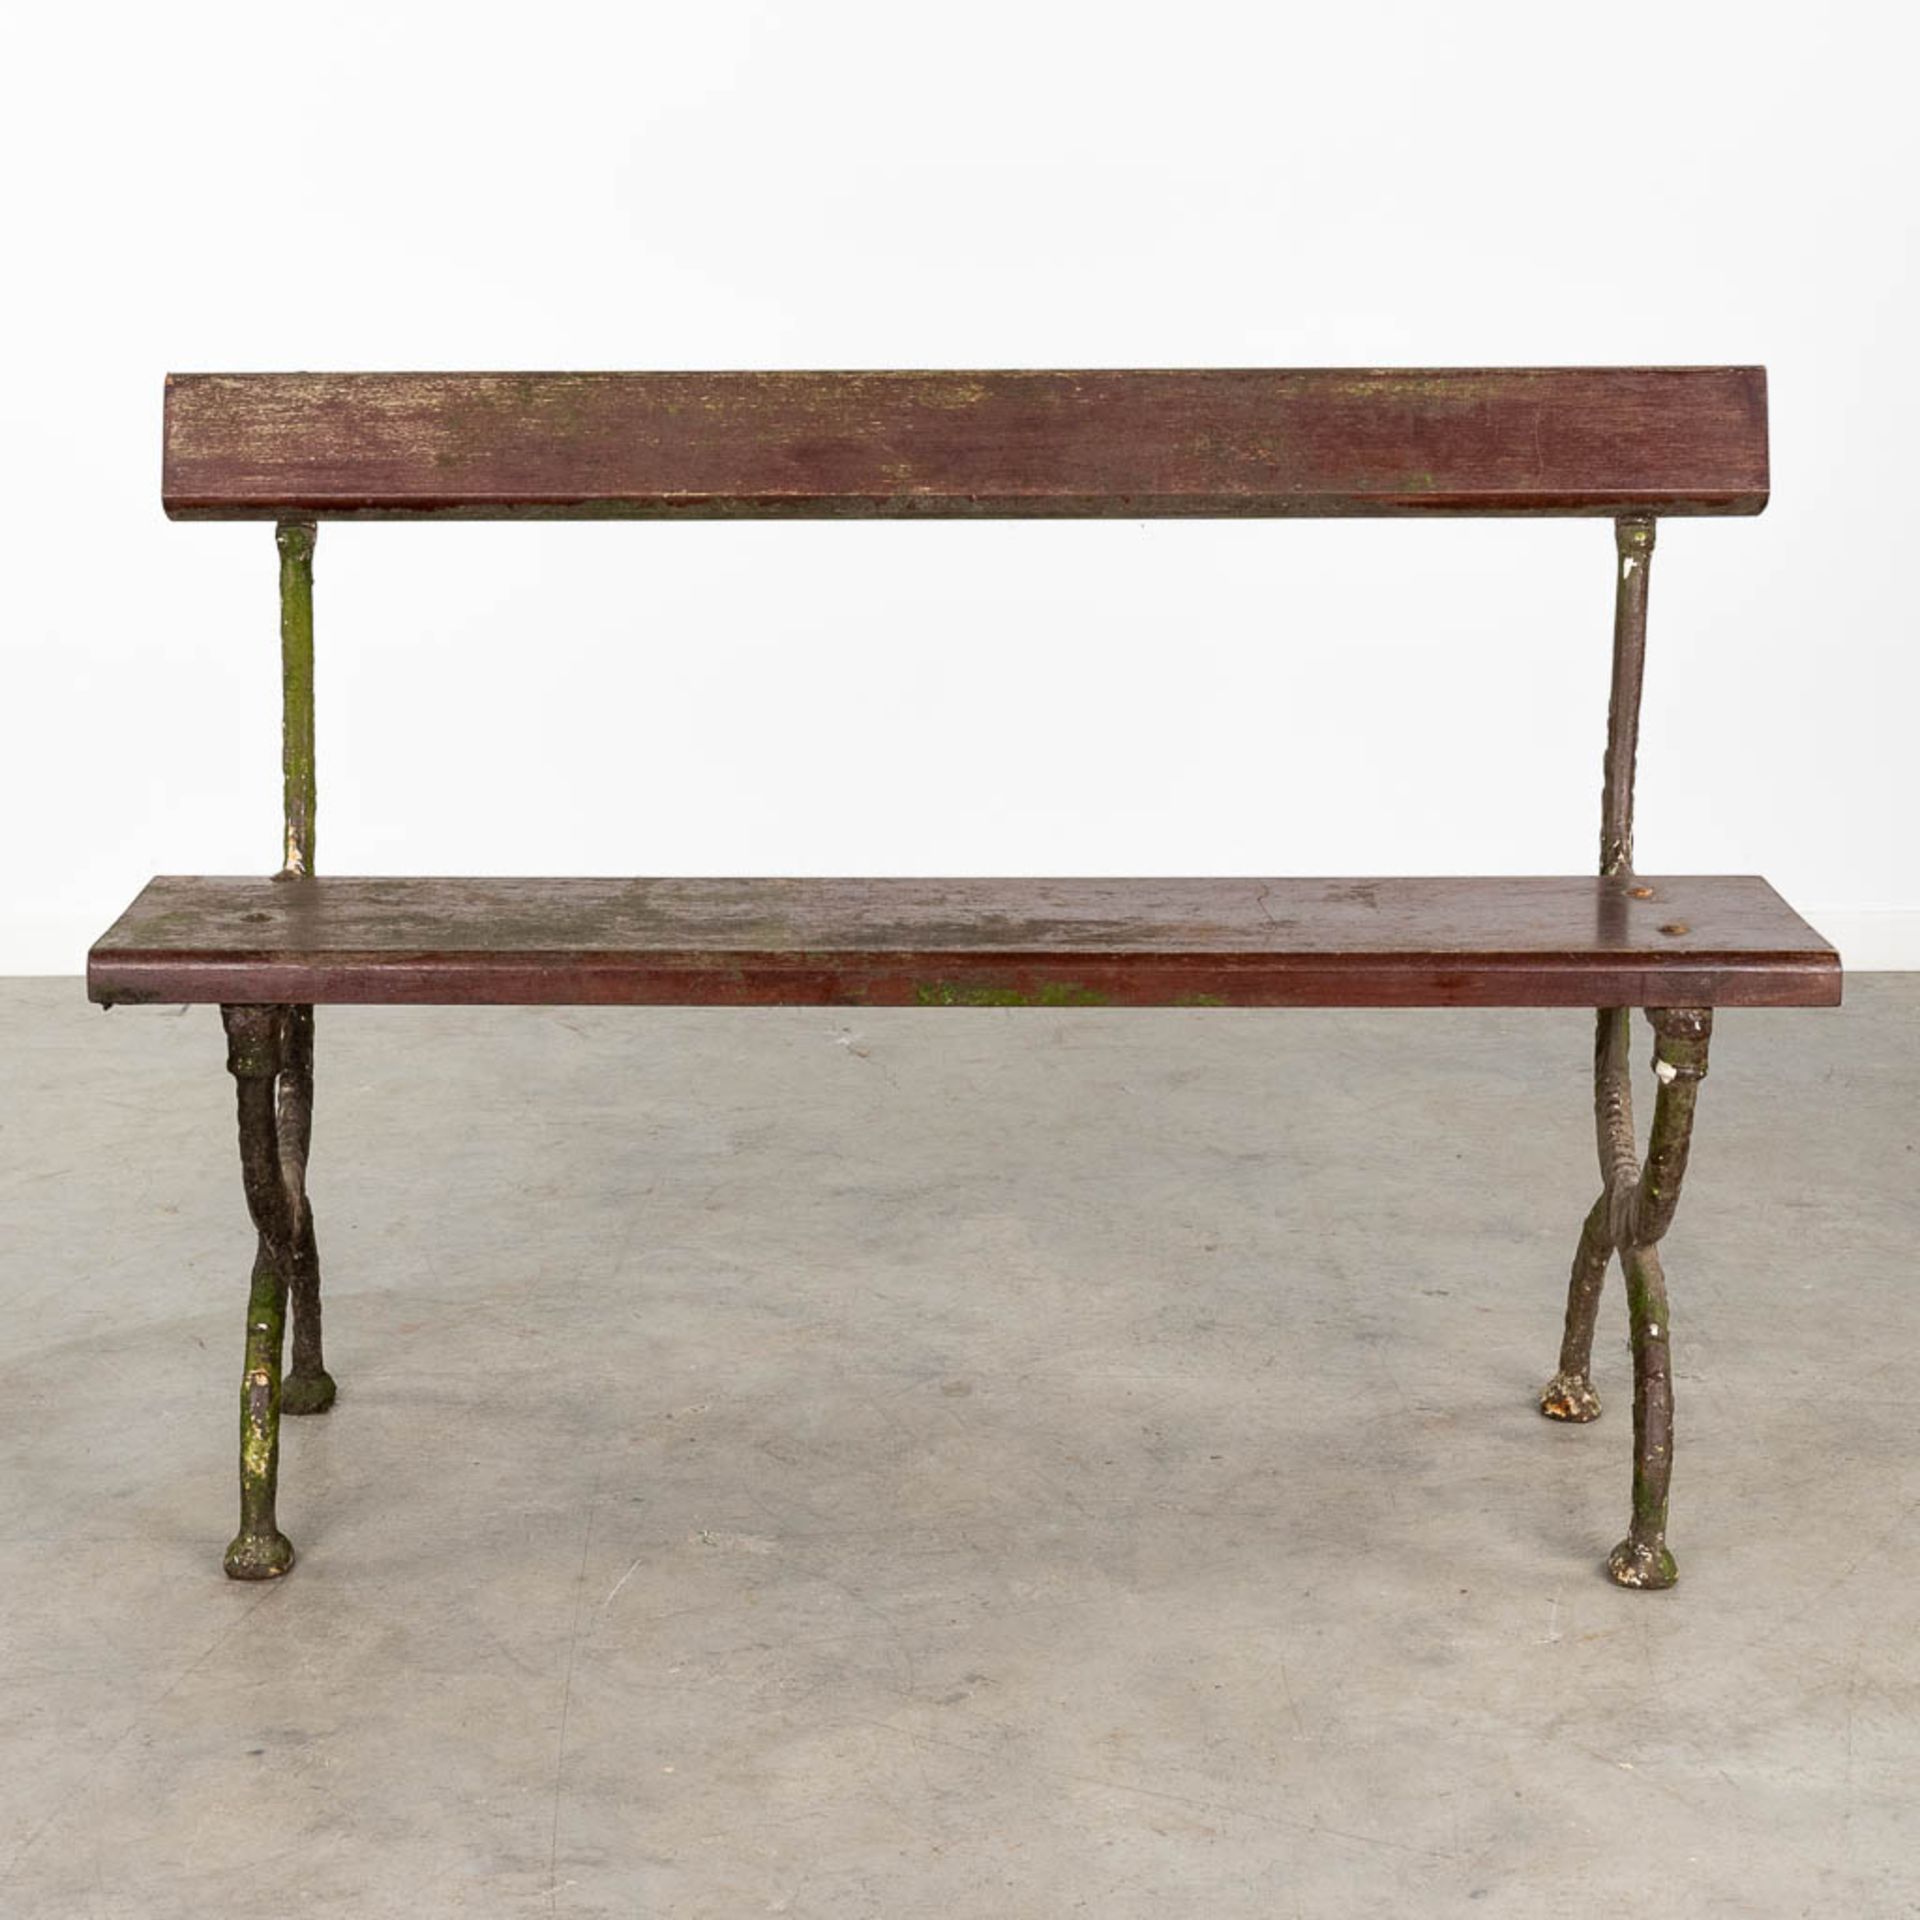 An antique garden bench, made of metal and wood. (L:46 x W:120 x H:82 cm) - Image 3 of 11